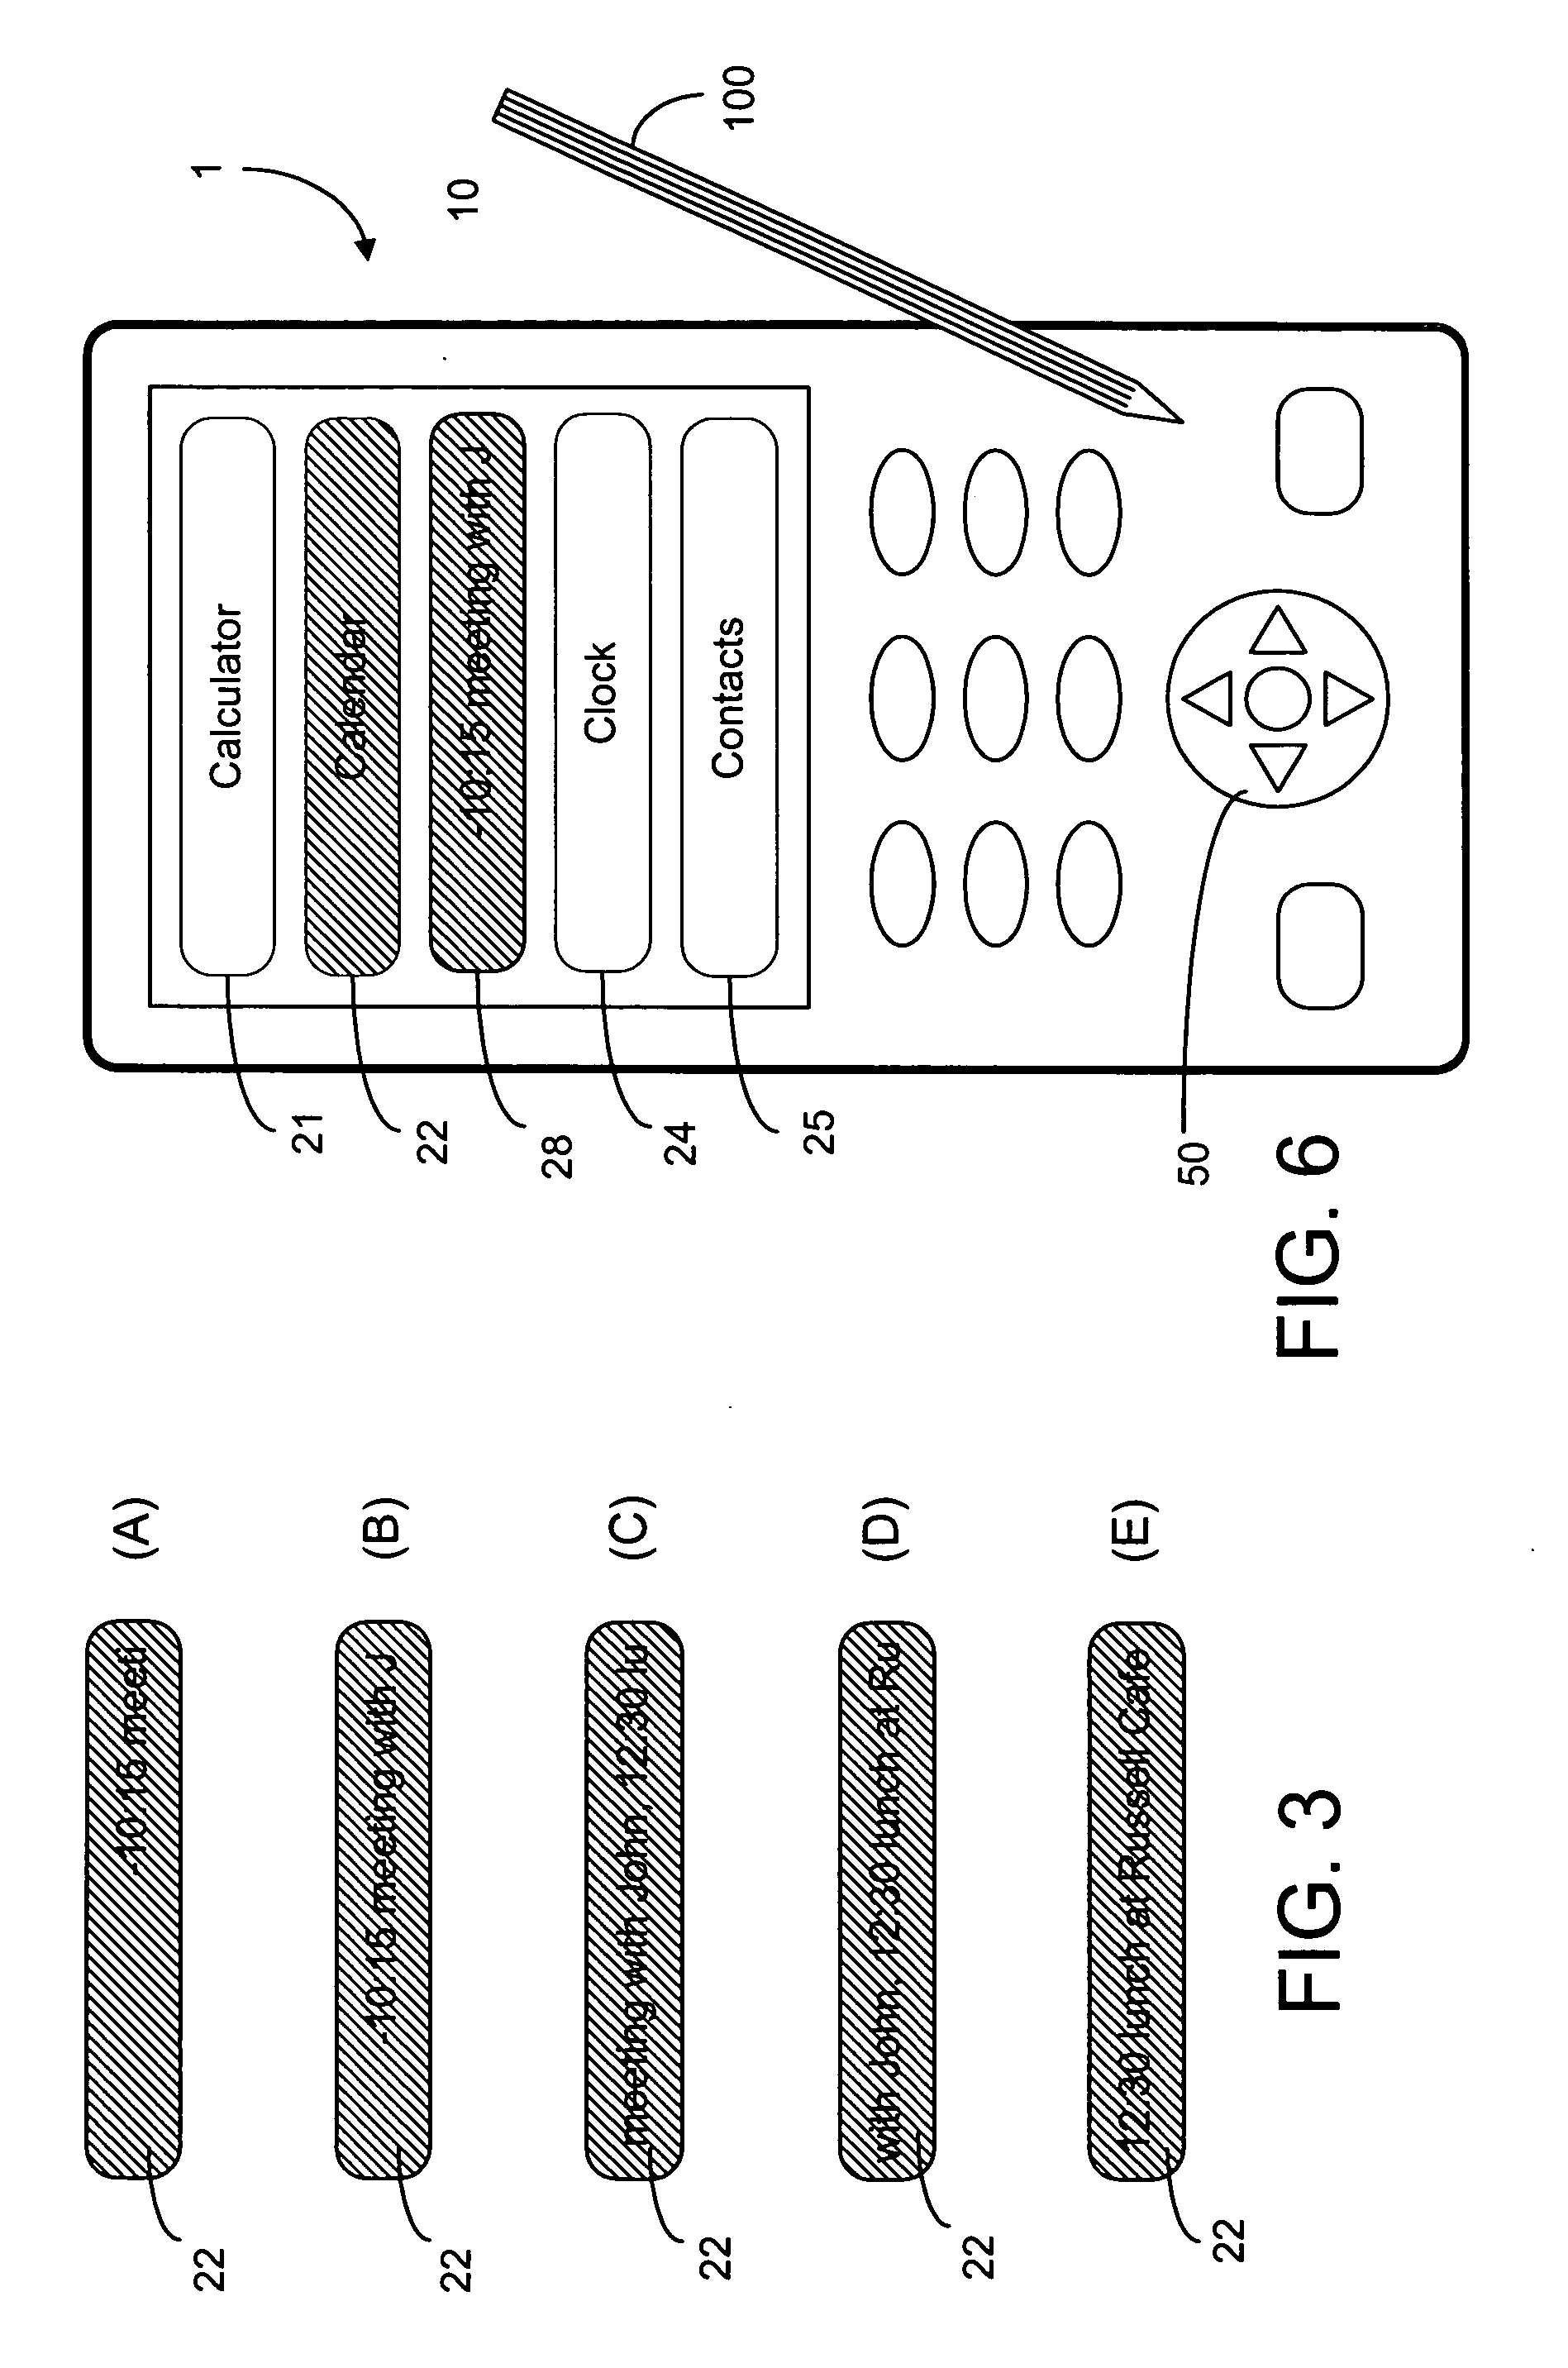 Animated user-interface in electronic devices